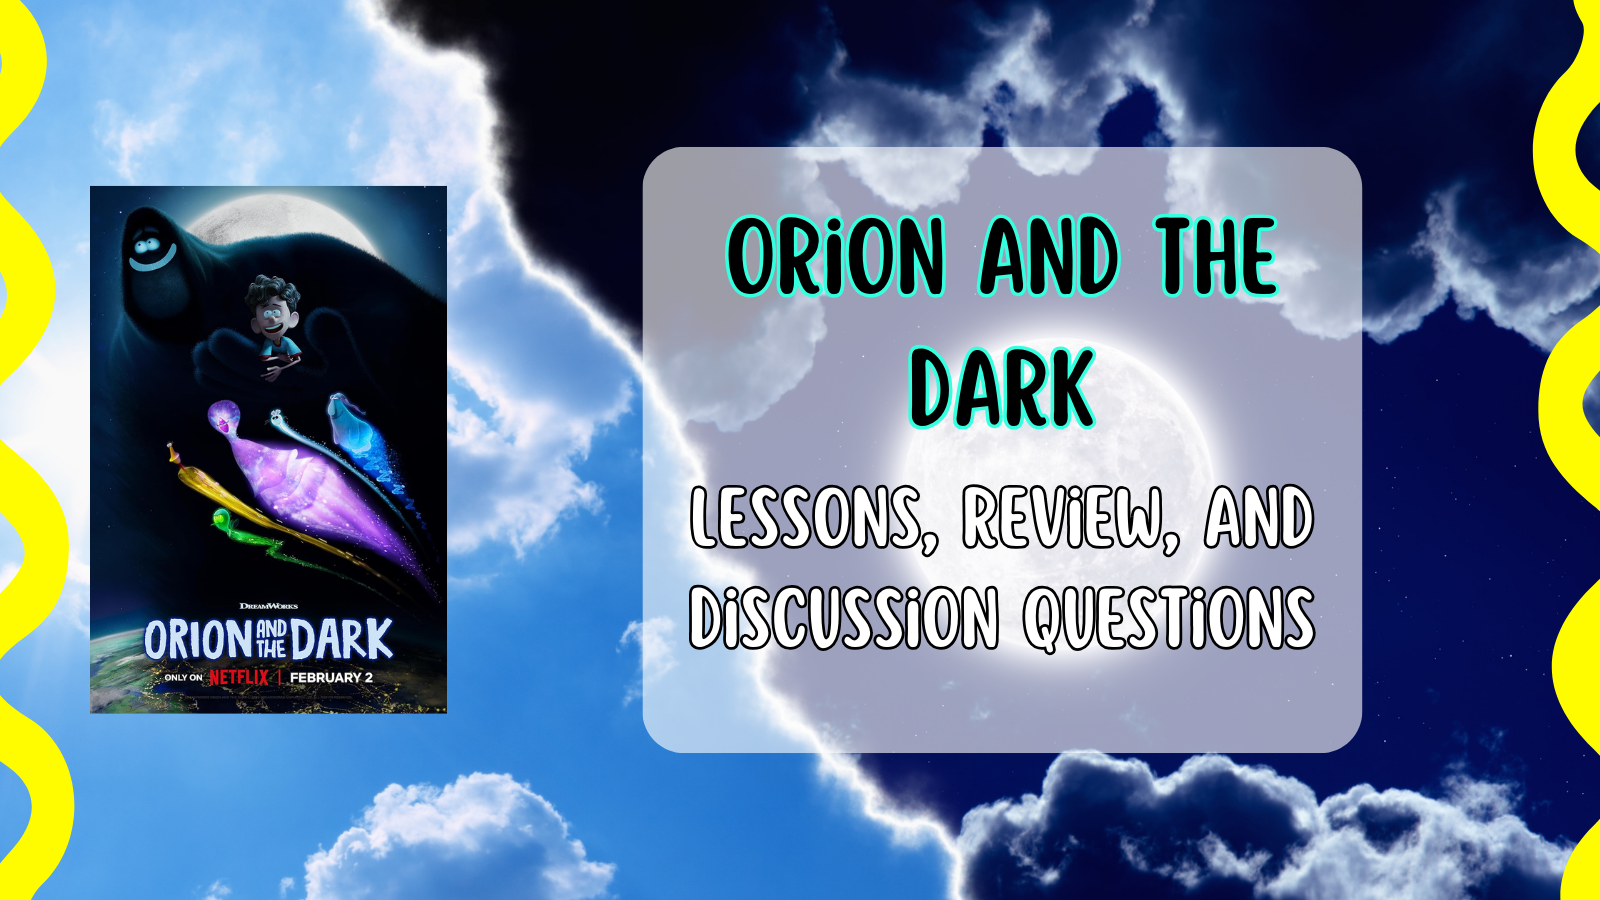 Lessons from Orion and the Dark